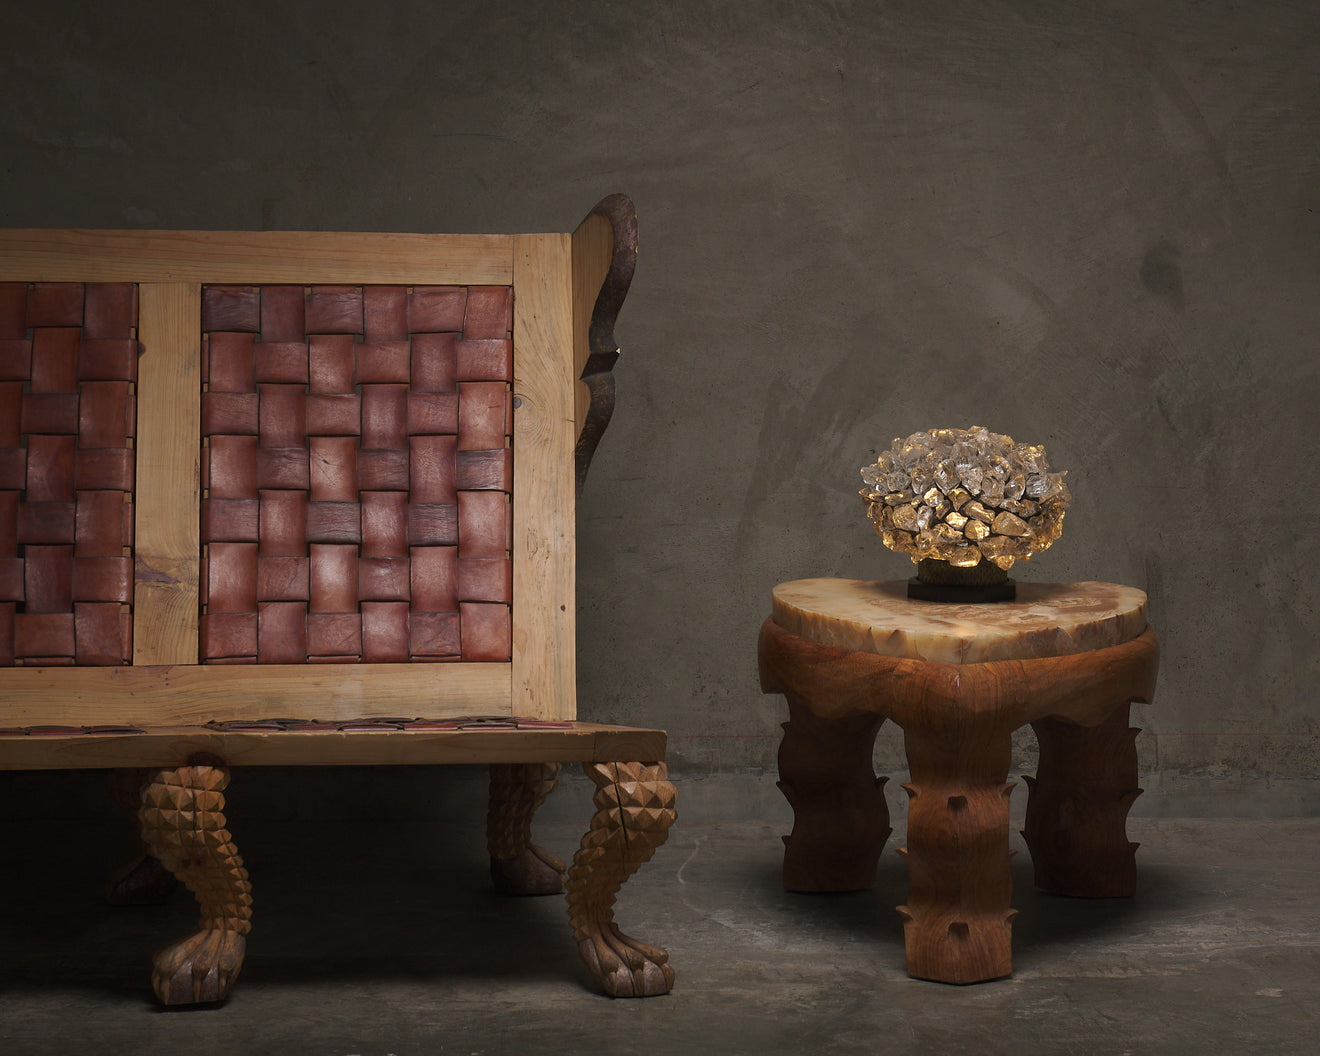 PAIR OF AREQUIPA SIDE TABLES BY MIKE DIAZ